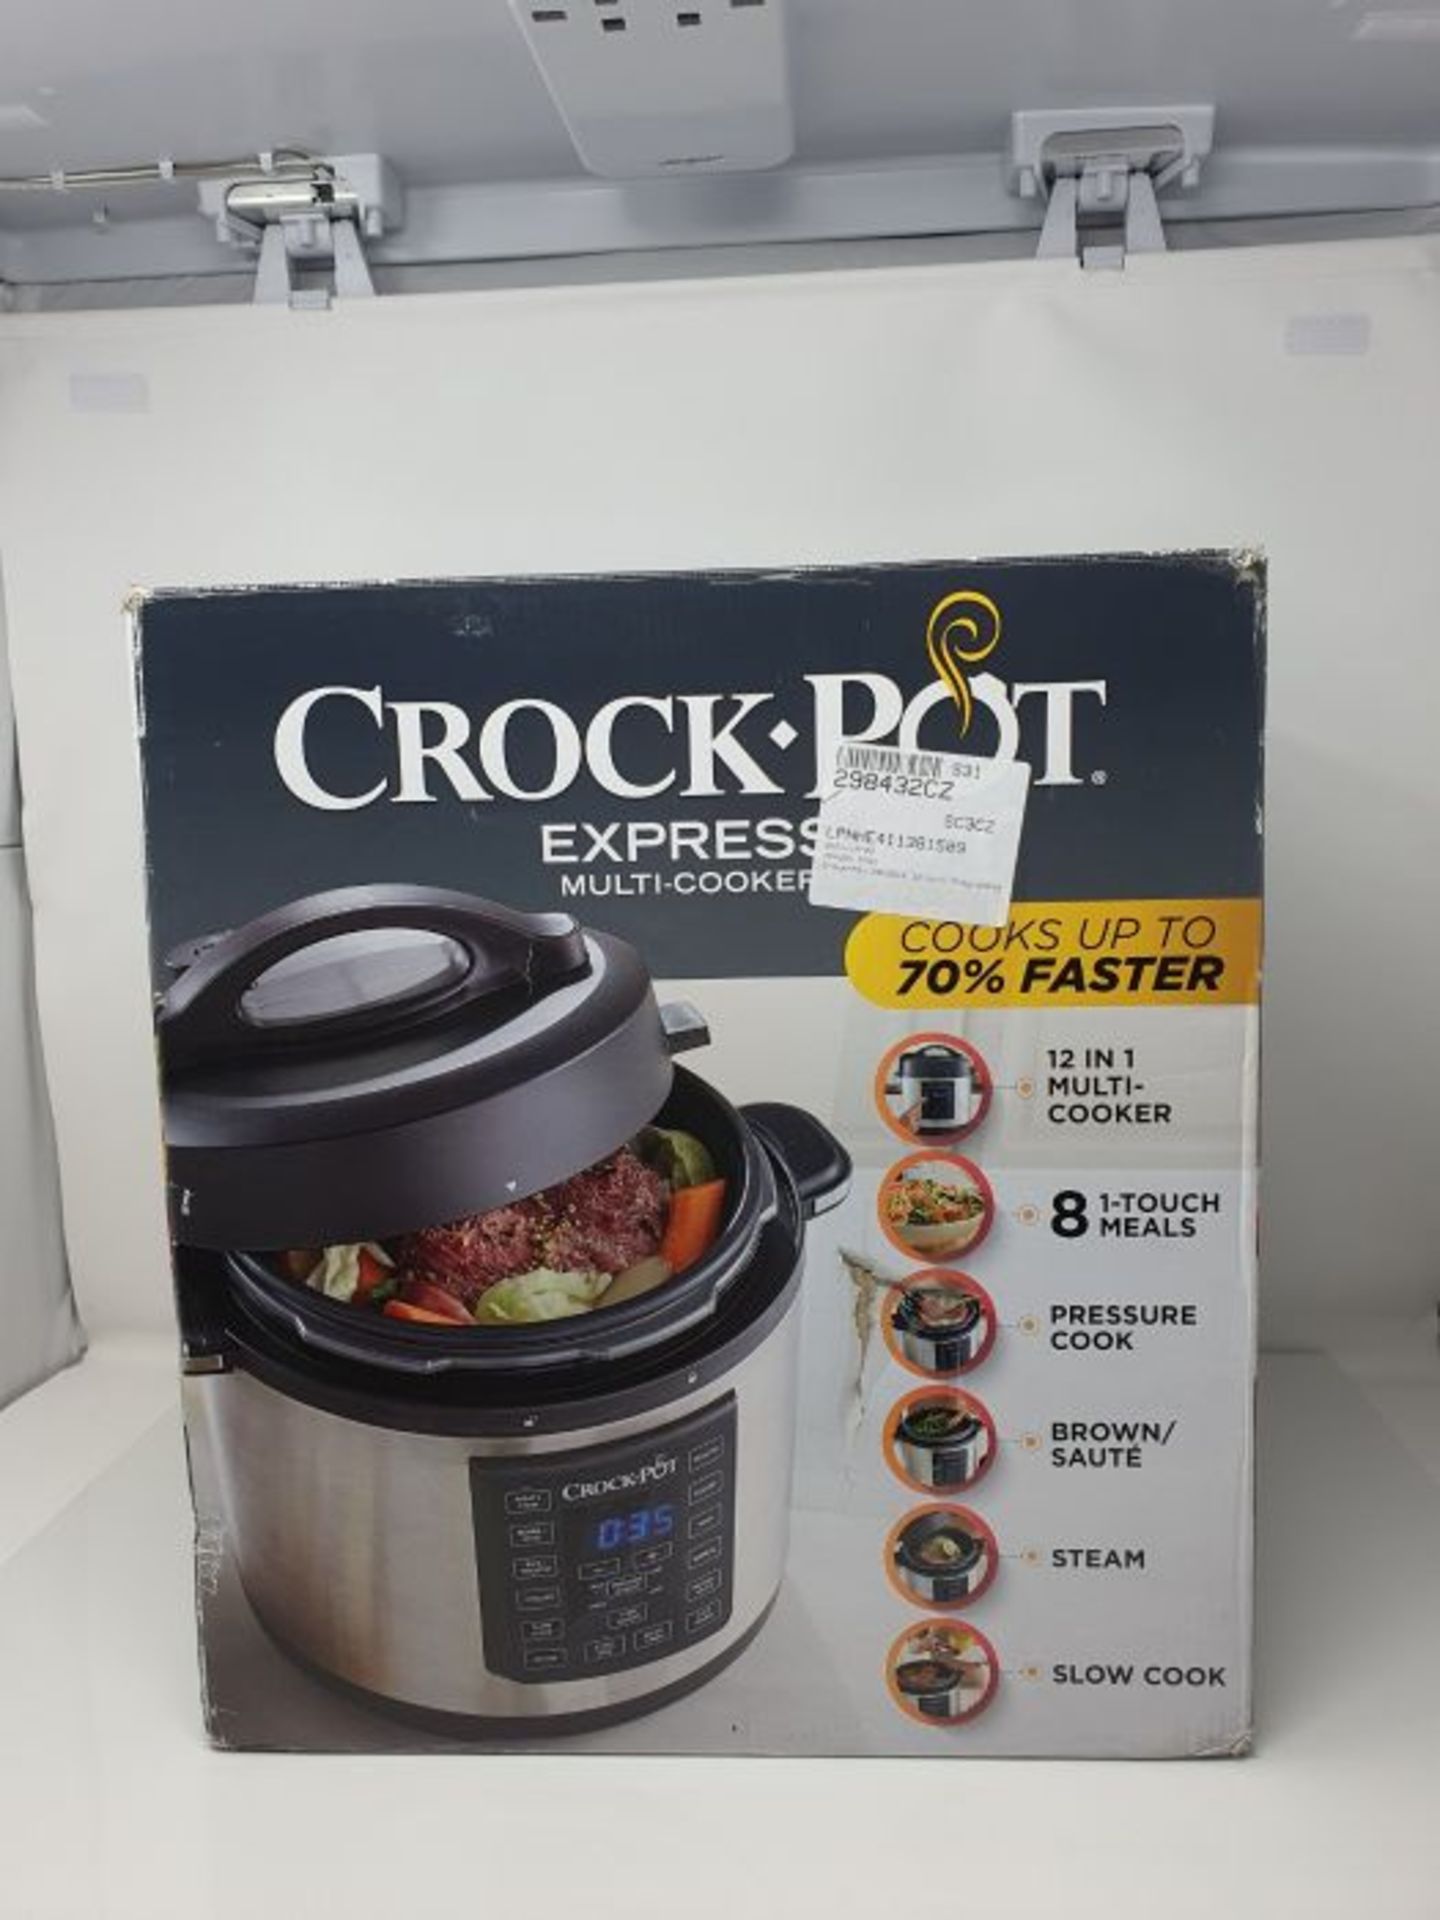 RRP £124.00 Crock-Pot Slow CSC051 x 12 in 1 Multi Cooker - The Original From The USA Programm - Image 2 of 3